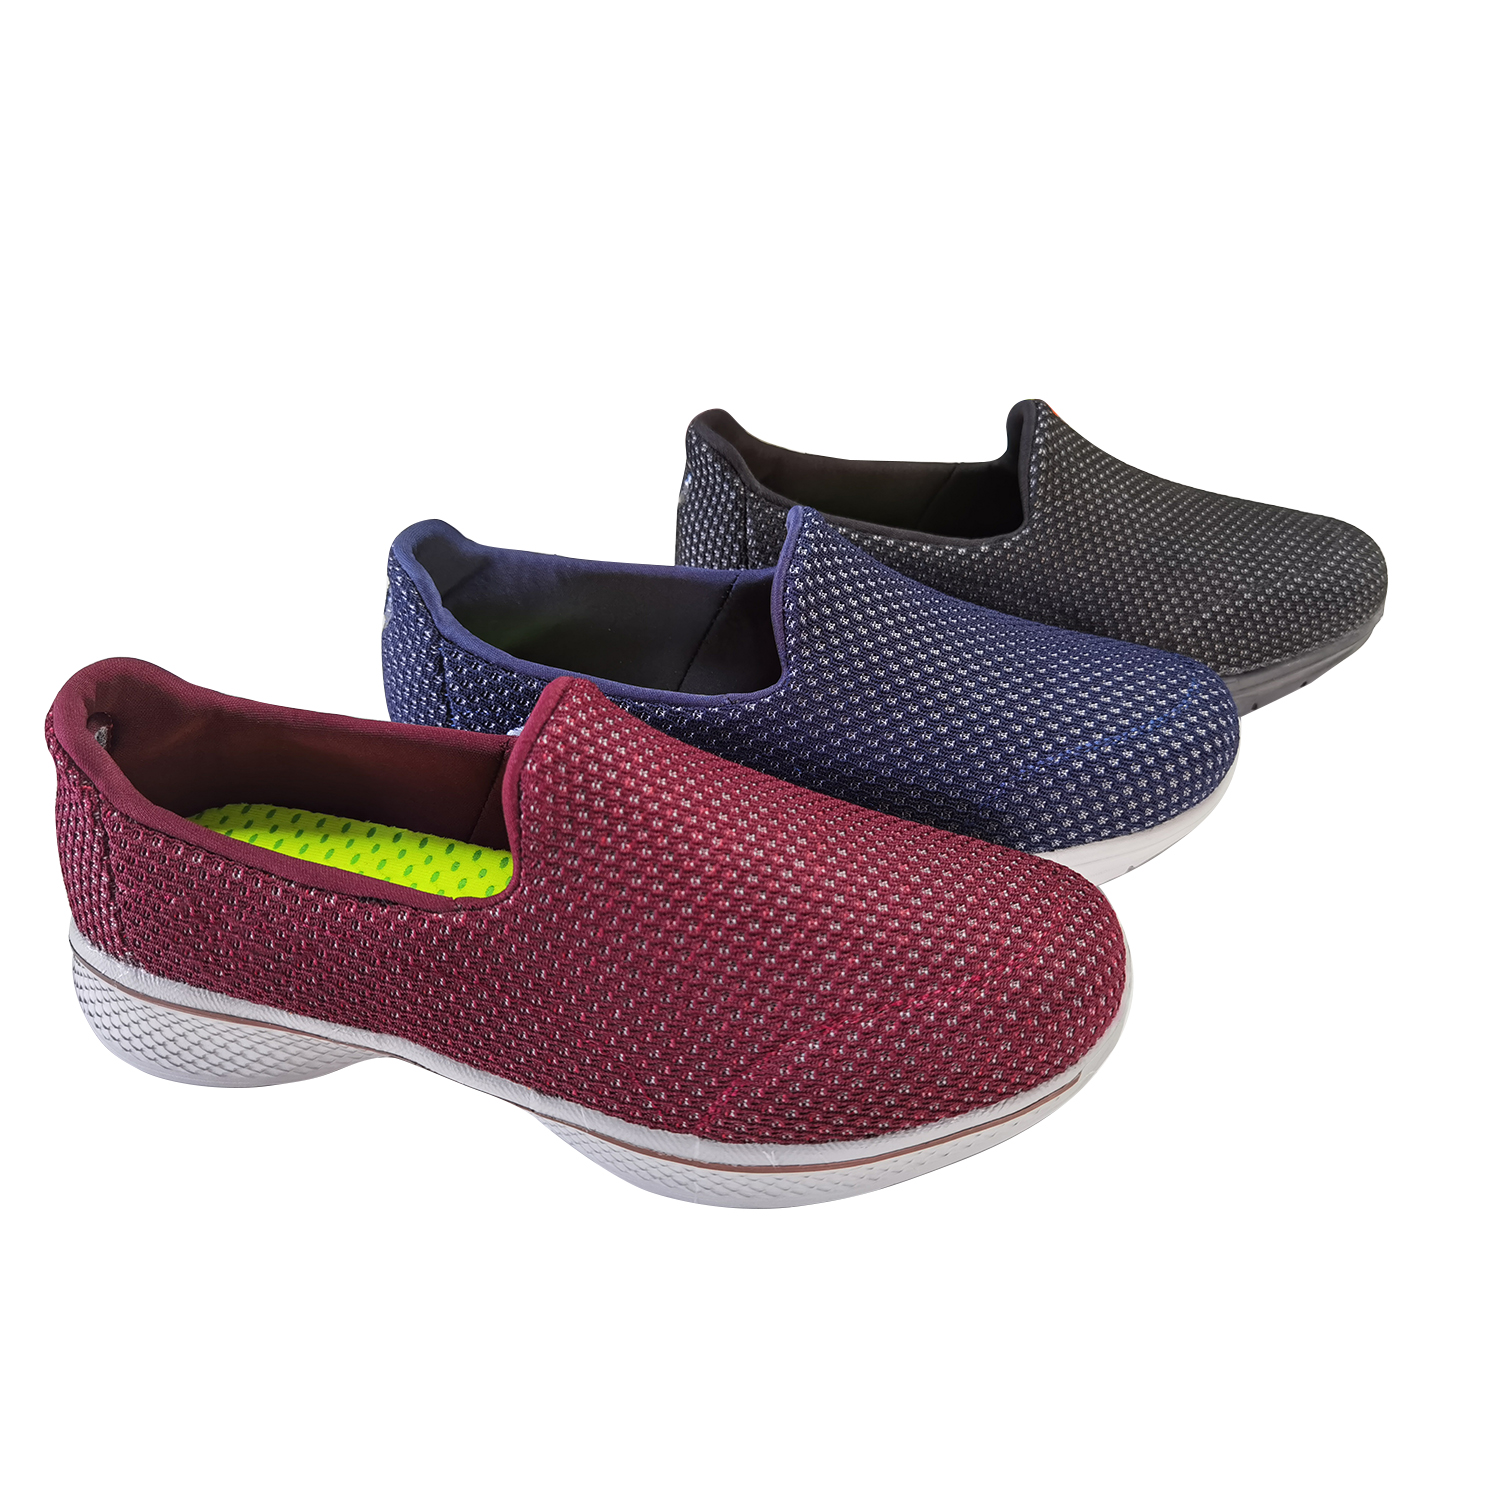 Men's Casual Shoes Slip On Sneakers